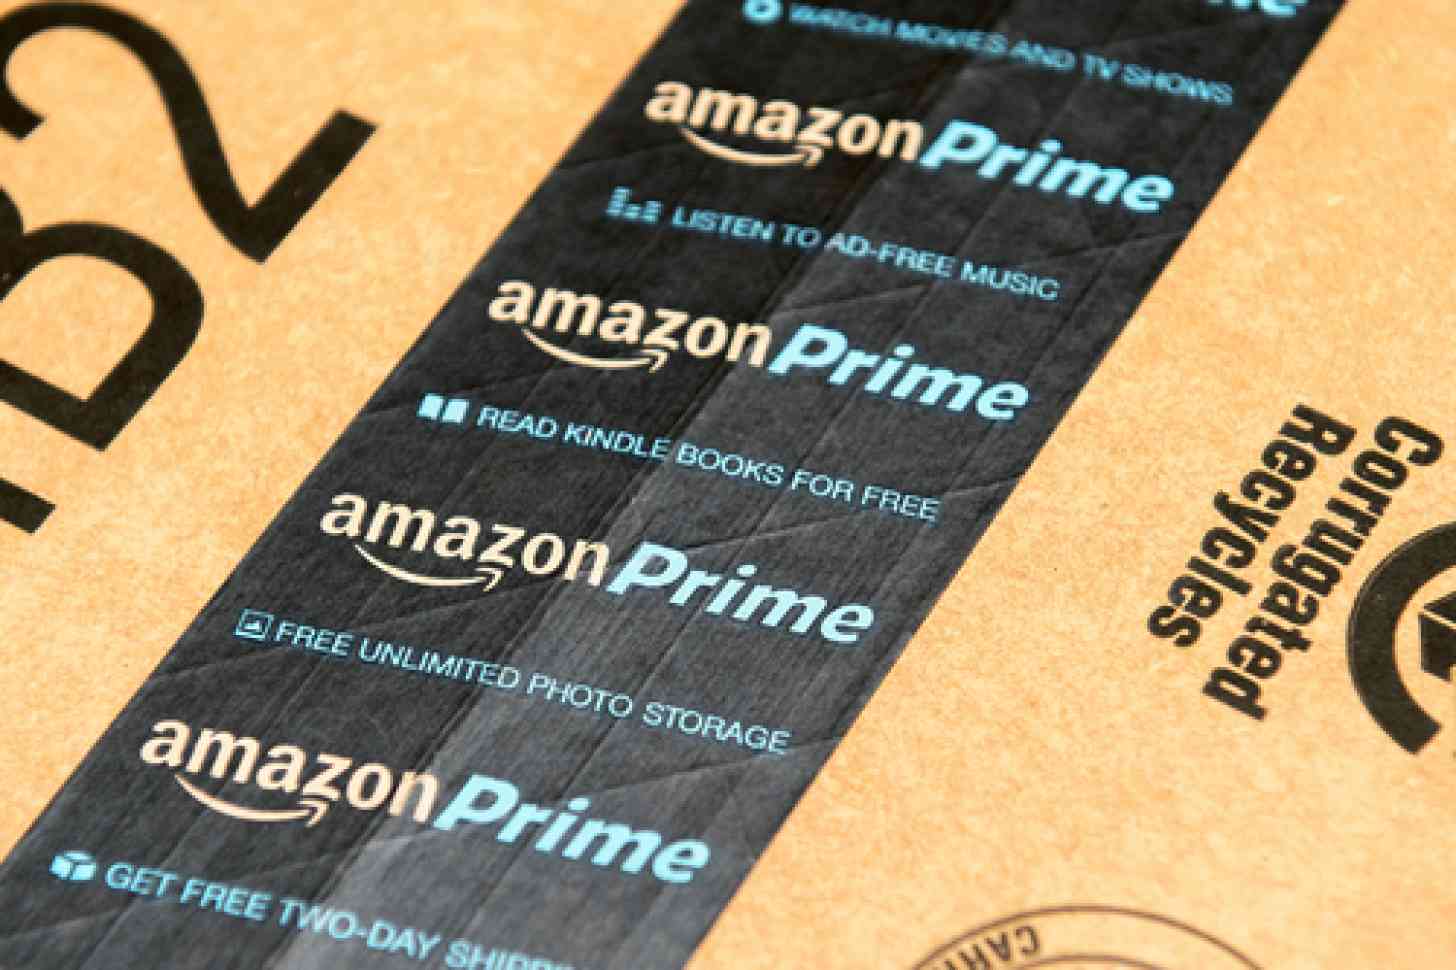 Sprint customers can now add an Amazon Prime subscription to their smartphone plan